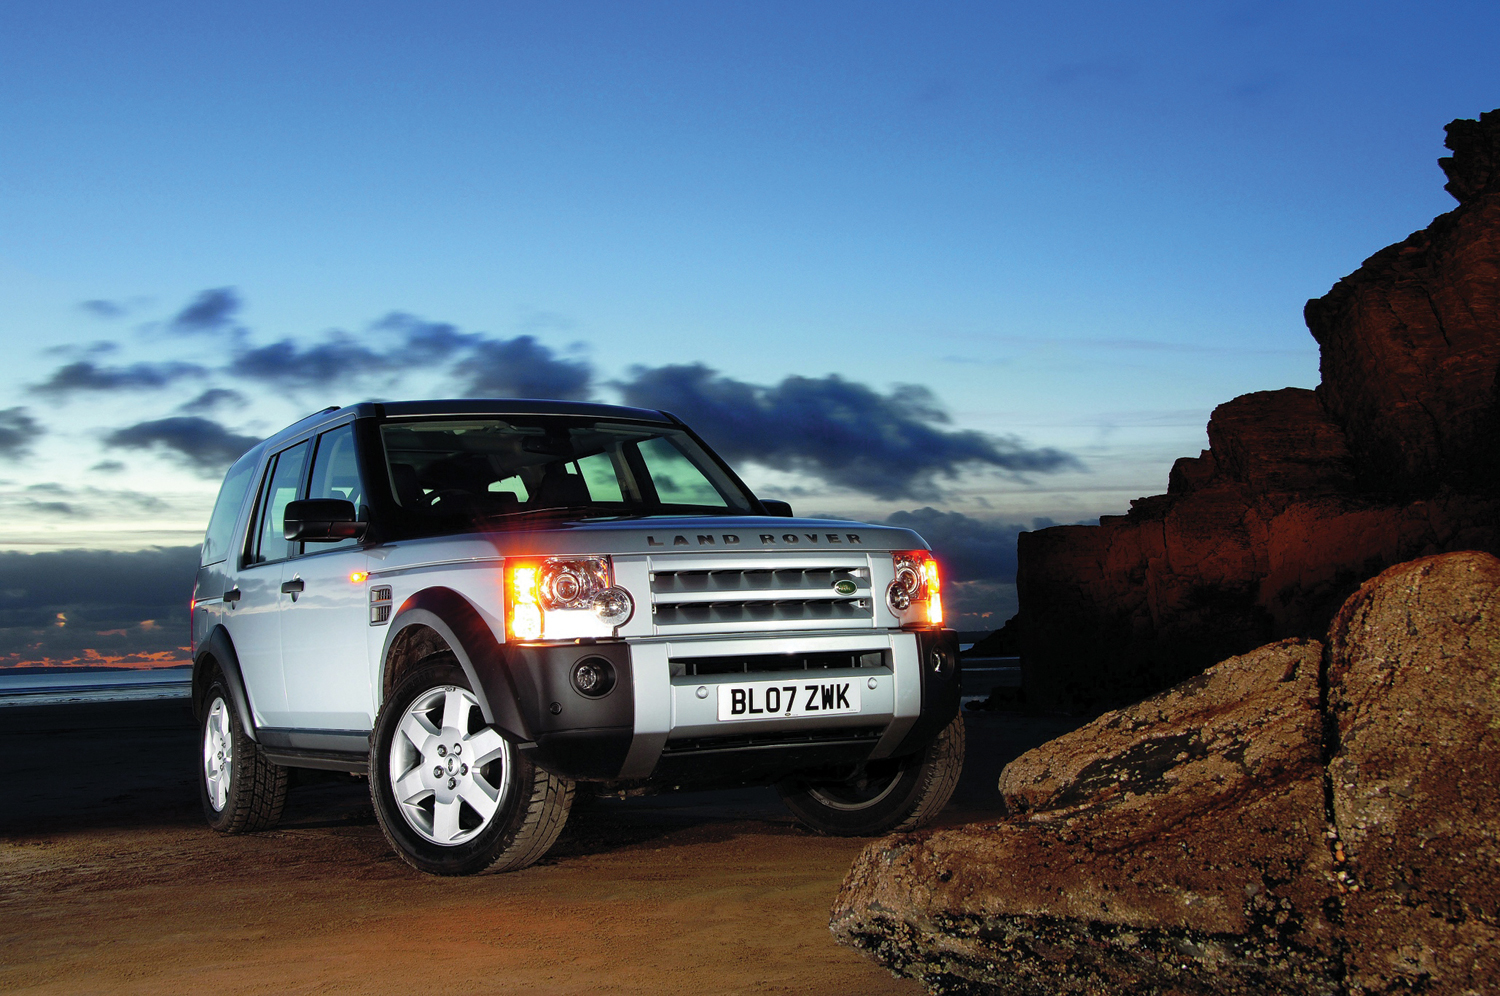 Land Rover Discovery 3. Дискавери 3 4.4 бензин. Дискавери 4 или Фрилендер 2. Land Rover Discovery 3 вес. Discover f